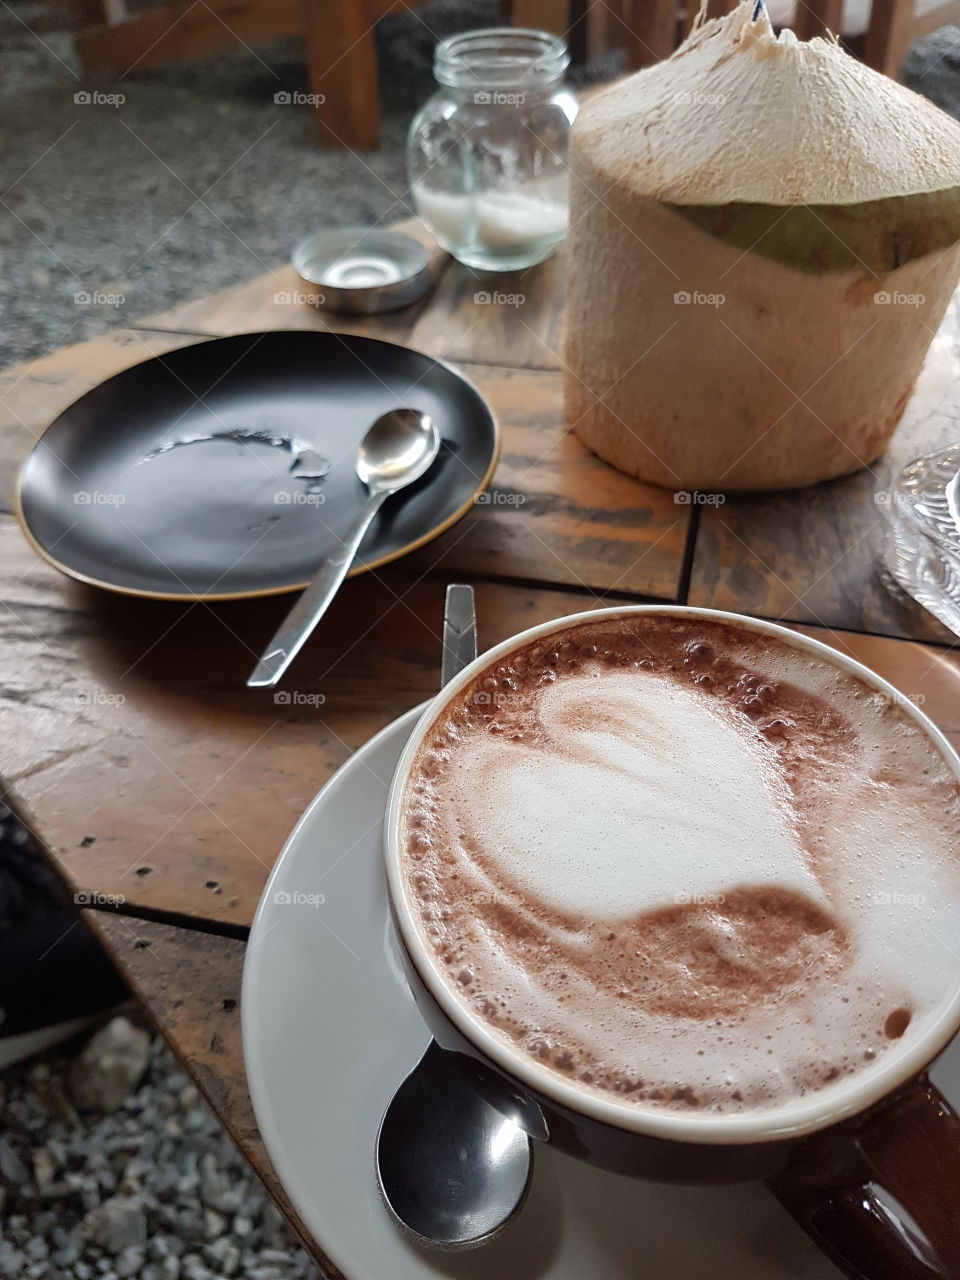 egg coffee time in Vietnam